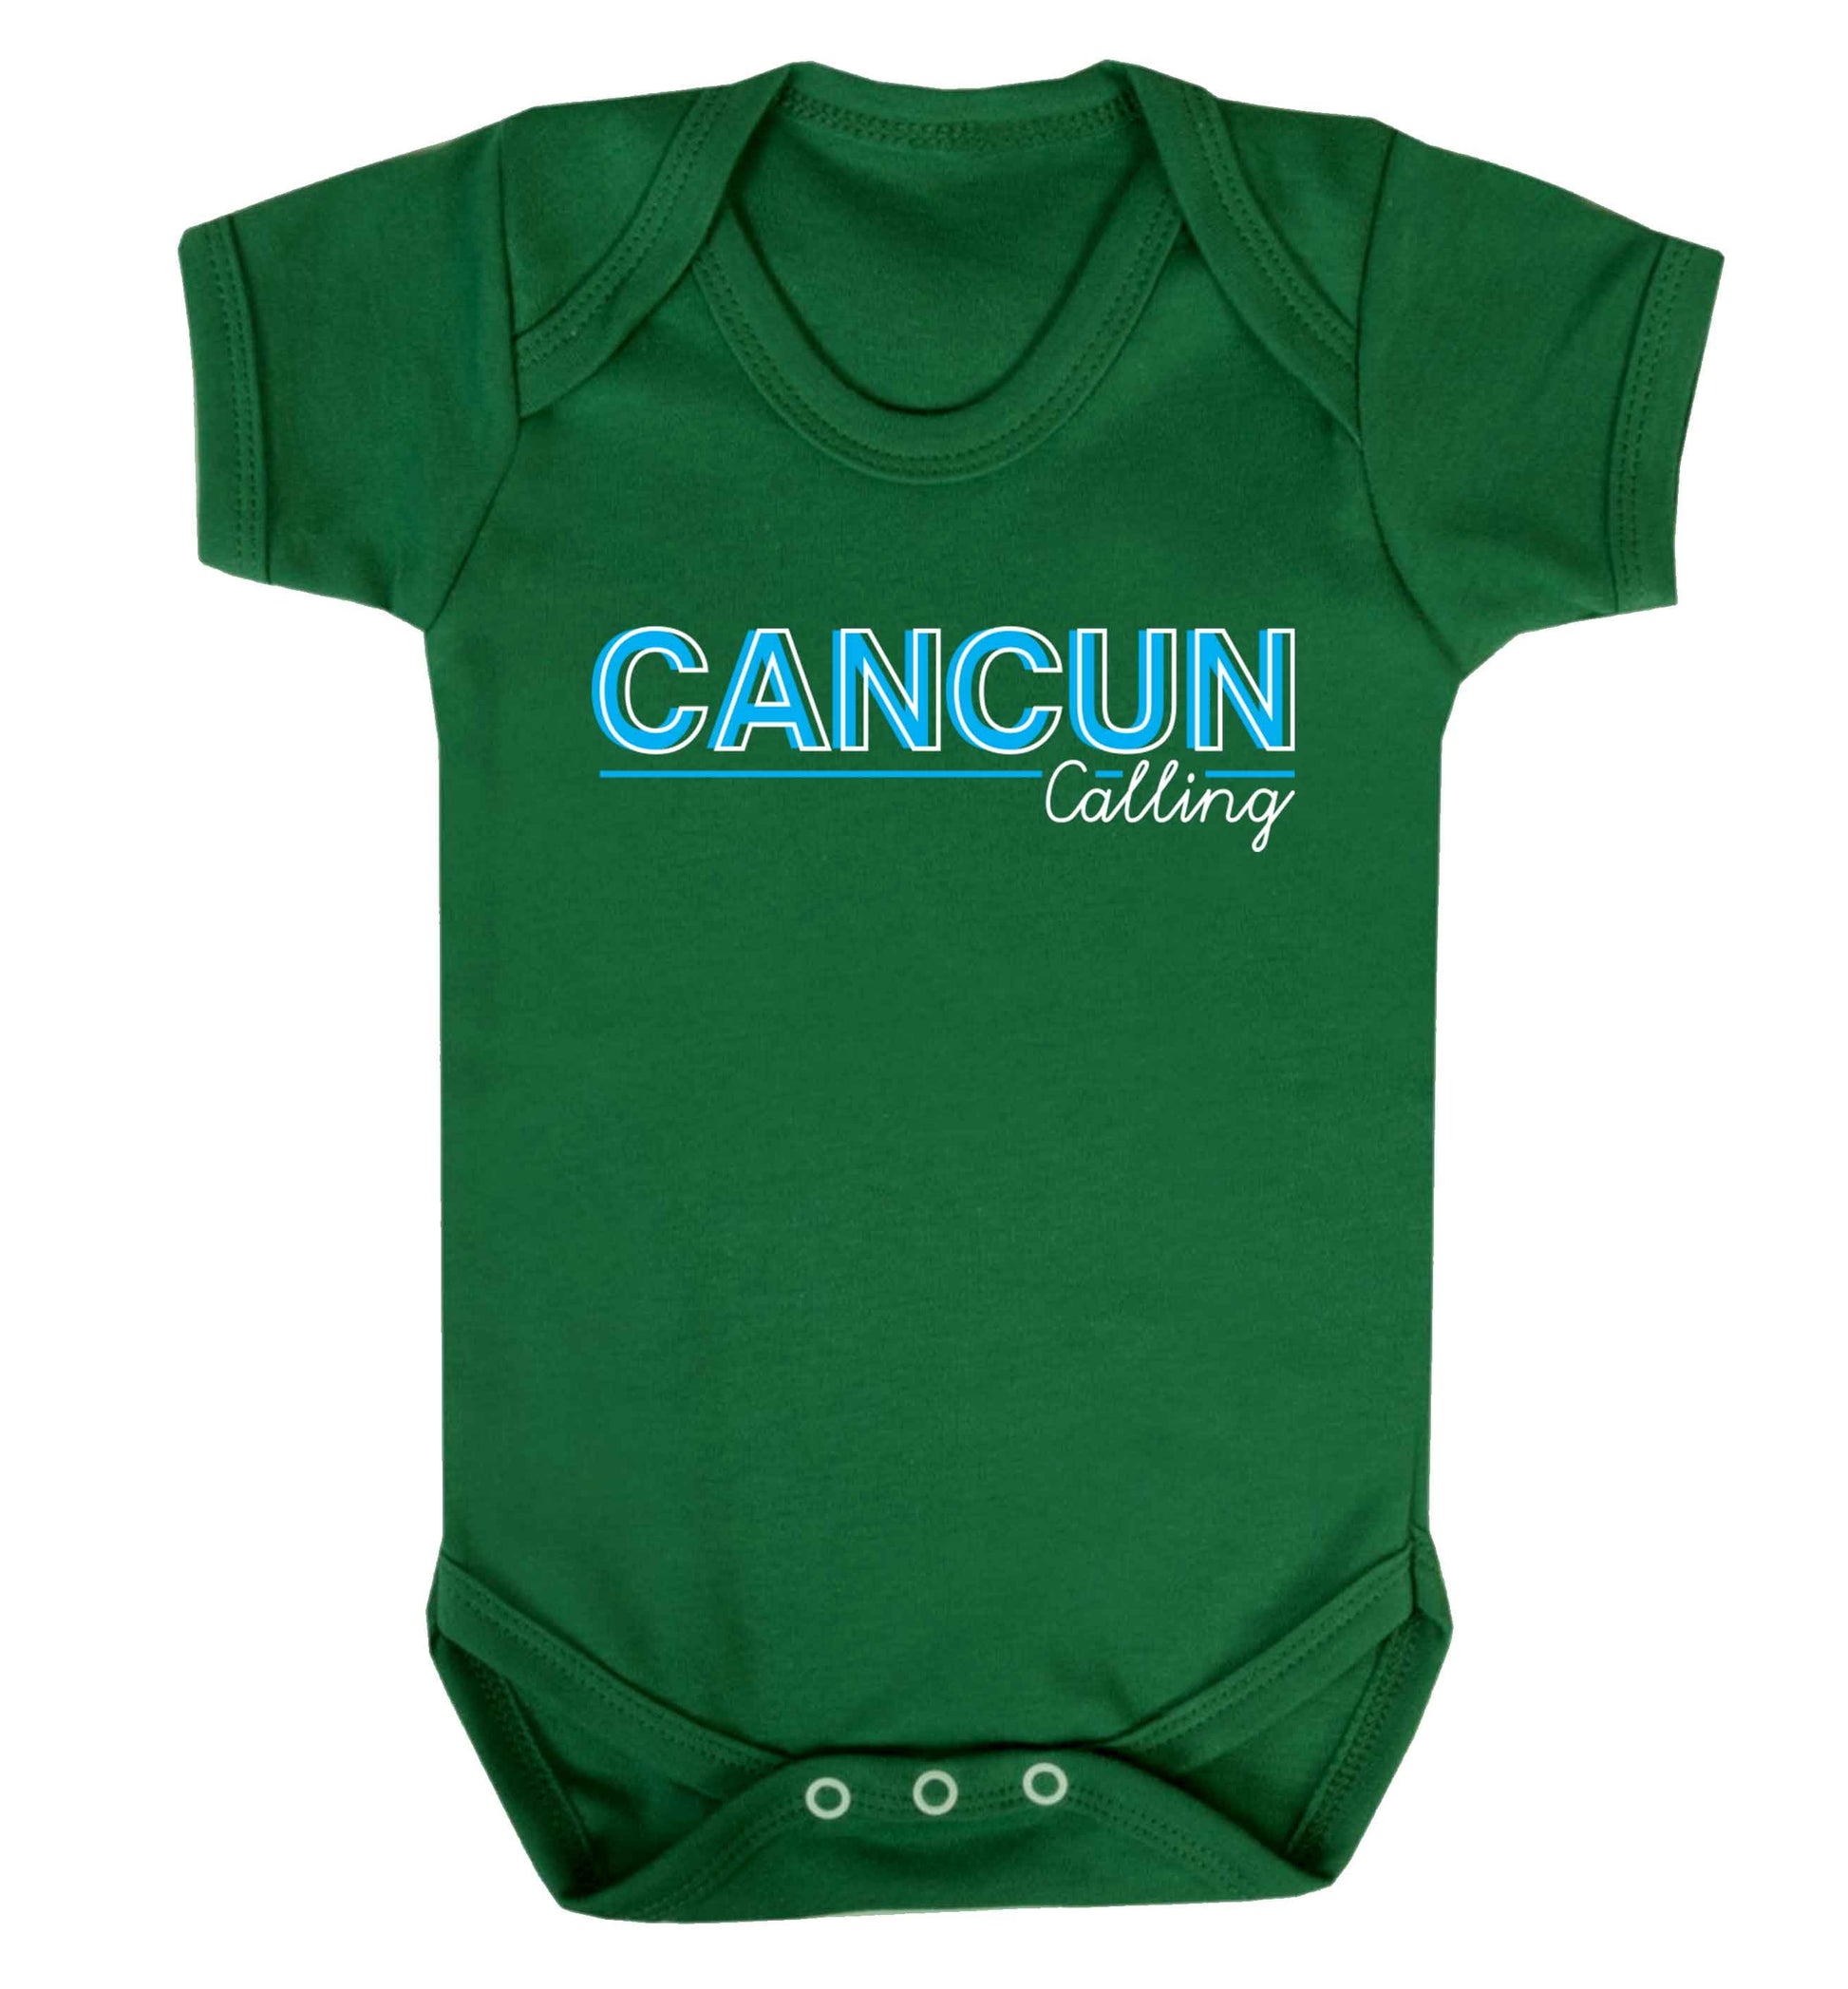 Cancun calling Baby Vest green 18-24 months